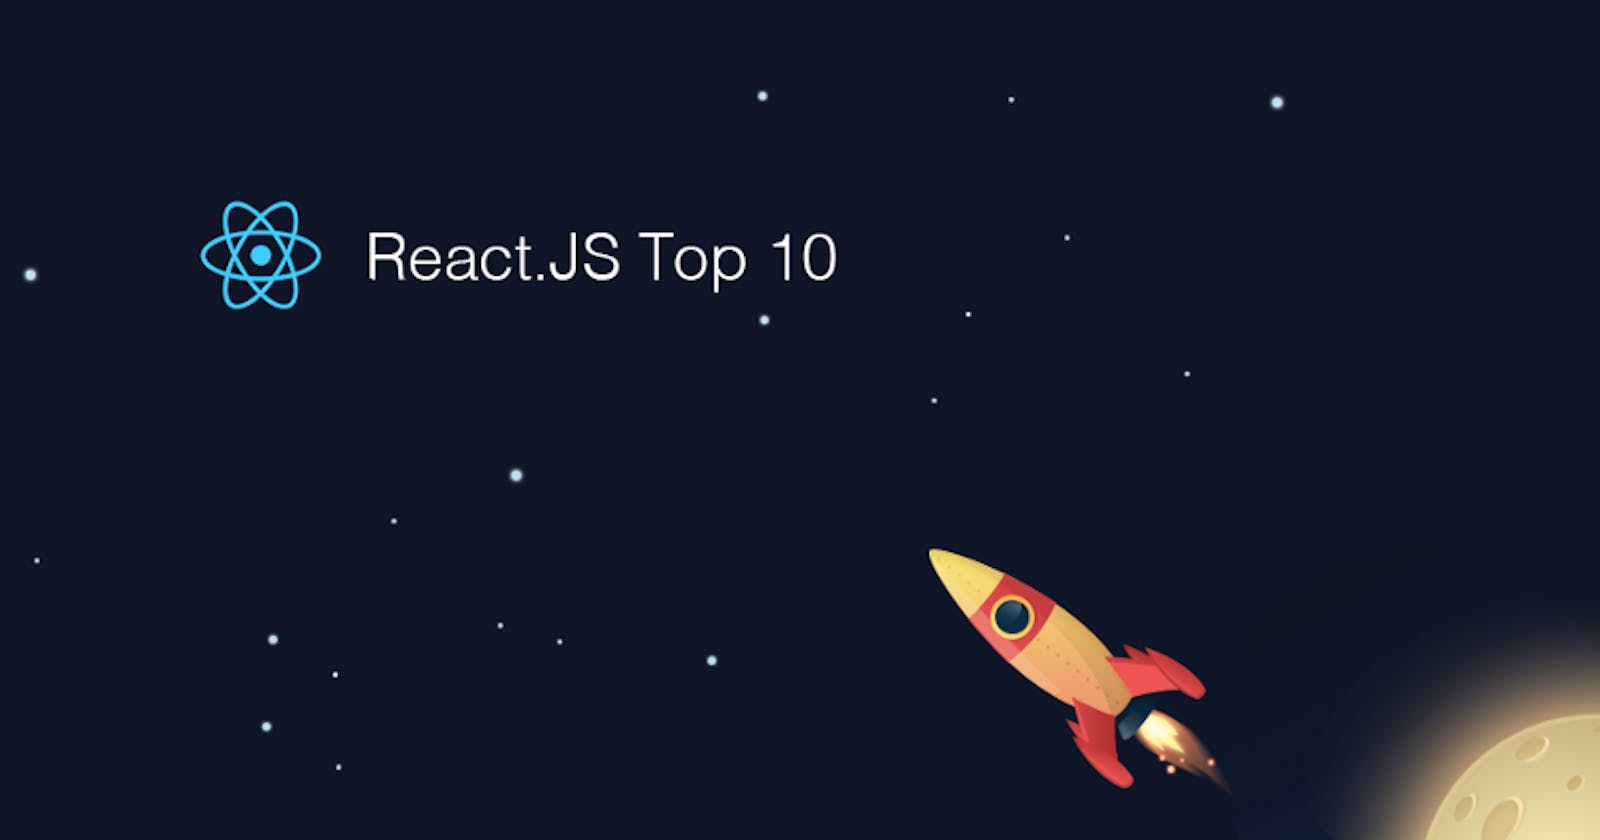 React.JS Top 10 Articles in March 2017 - Mybridge for Professionals